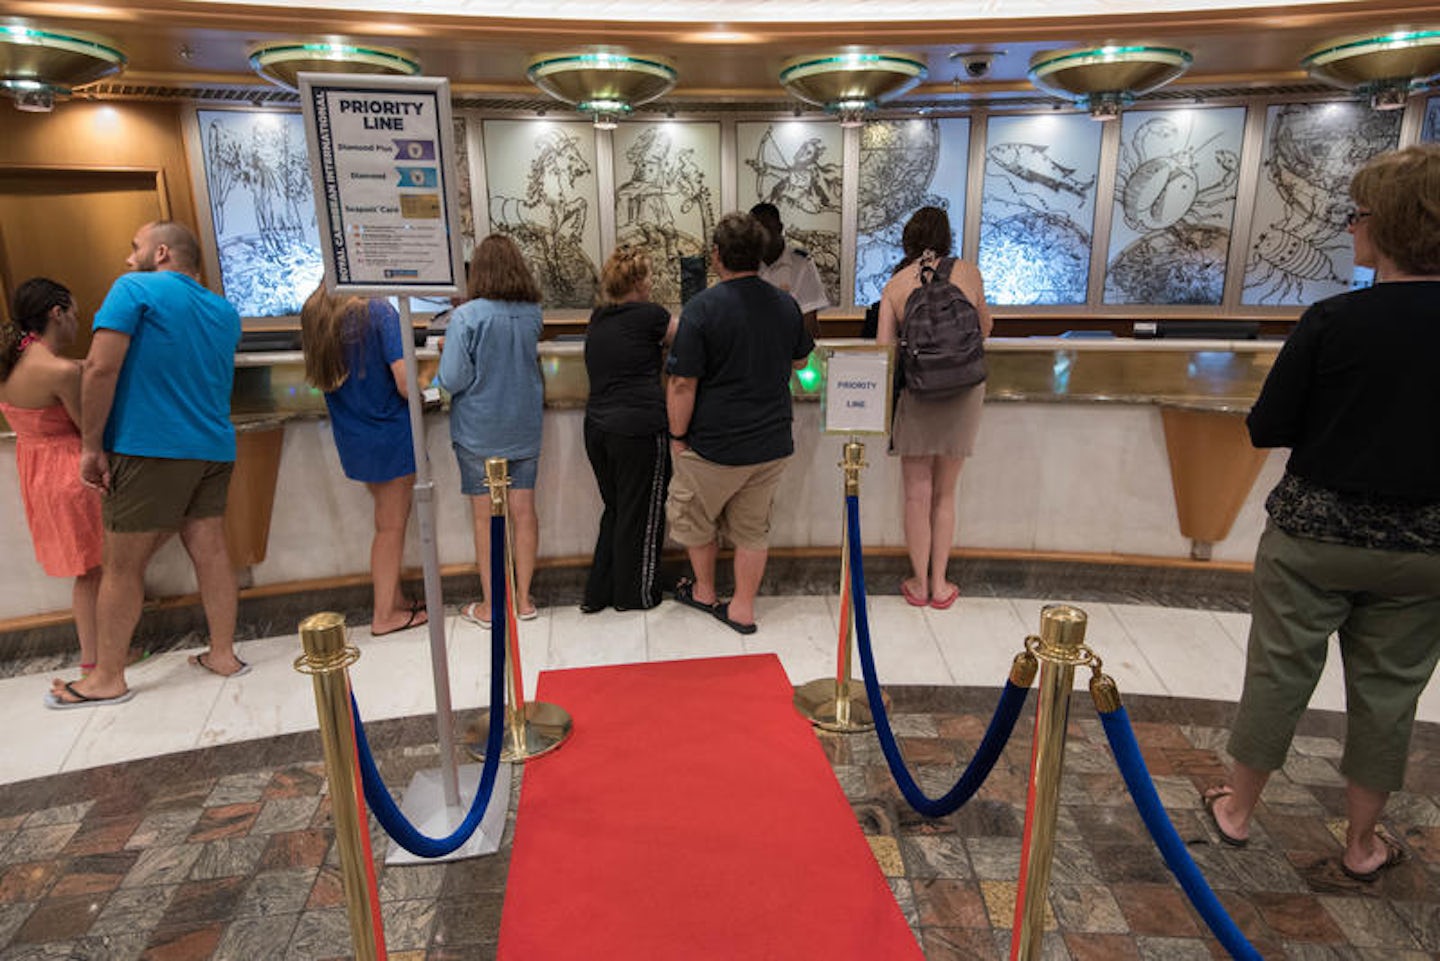 Passenger Services Desk on Freedom of the Seas